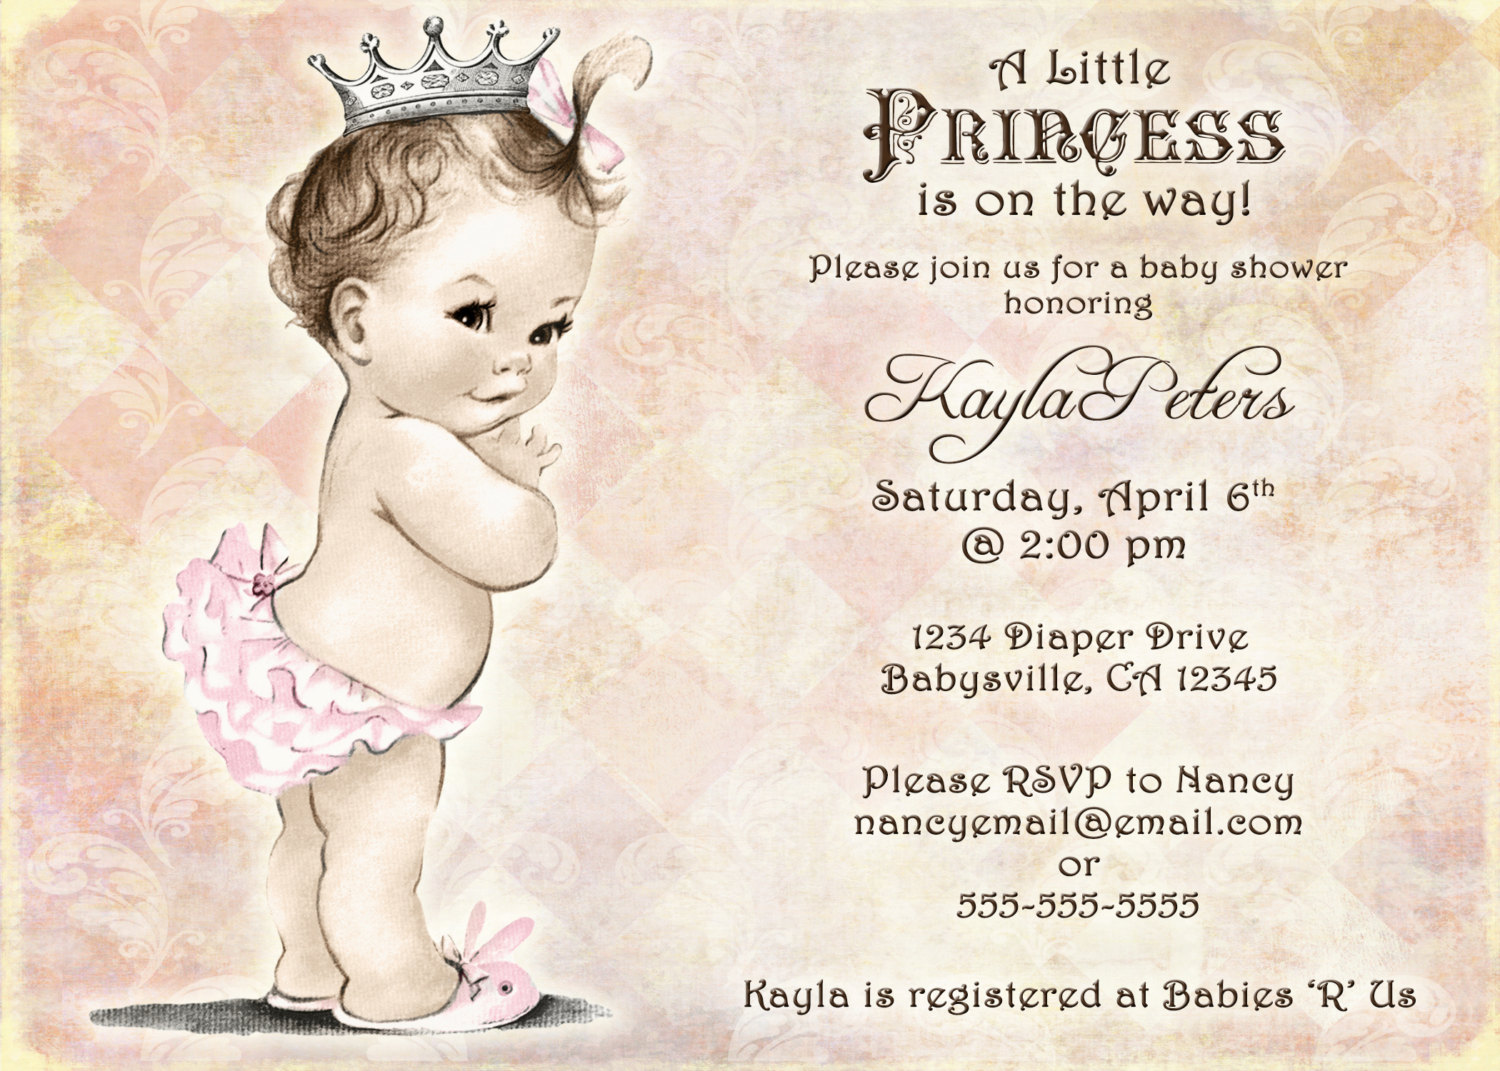 Full Size of Baby Shower:baby Shower Invitations Baby Boy Shower Ideas Themes For Baby Girl Nursery Baby Shower Themes Baby Shower Themes For Girls